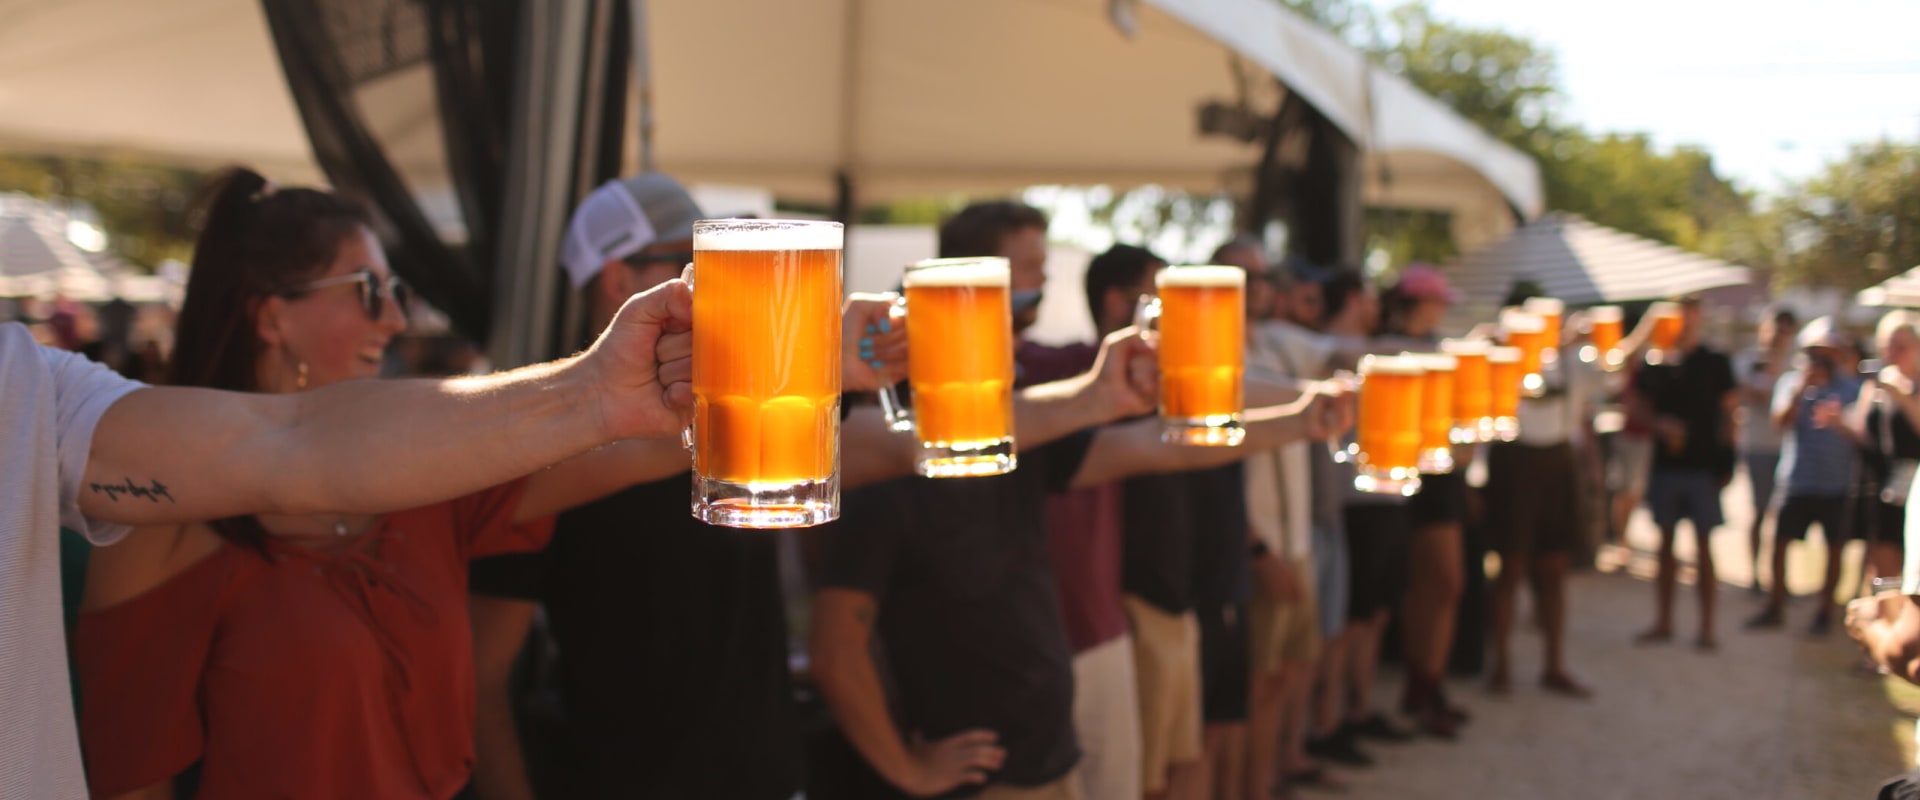 The Ultimate Guide to Food Vendors at the Beer Festival in Austin, TX: A Beer Expert's Perspective